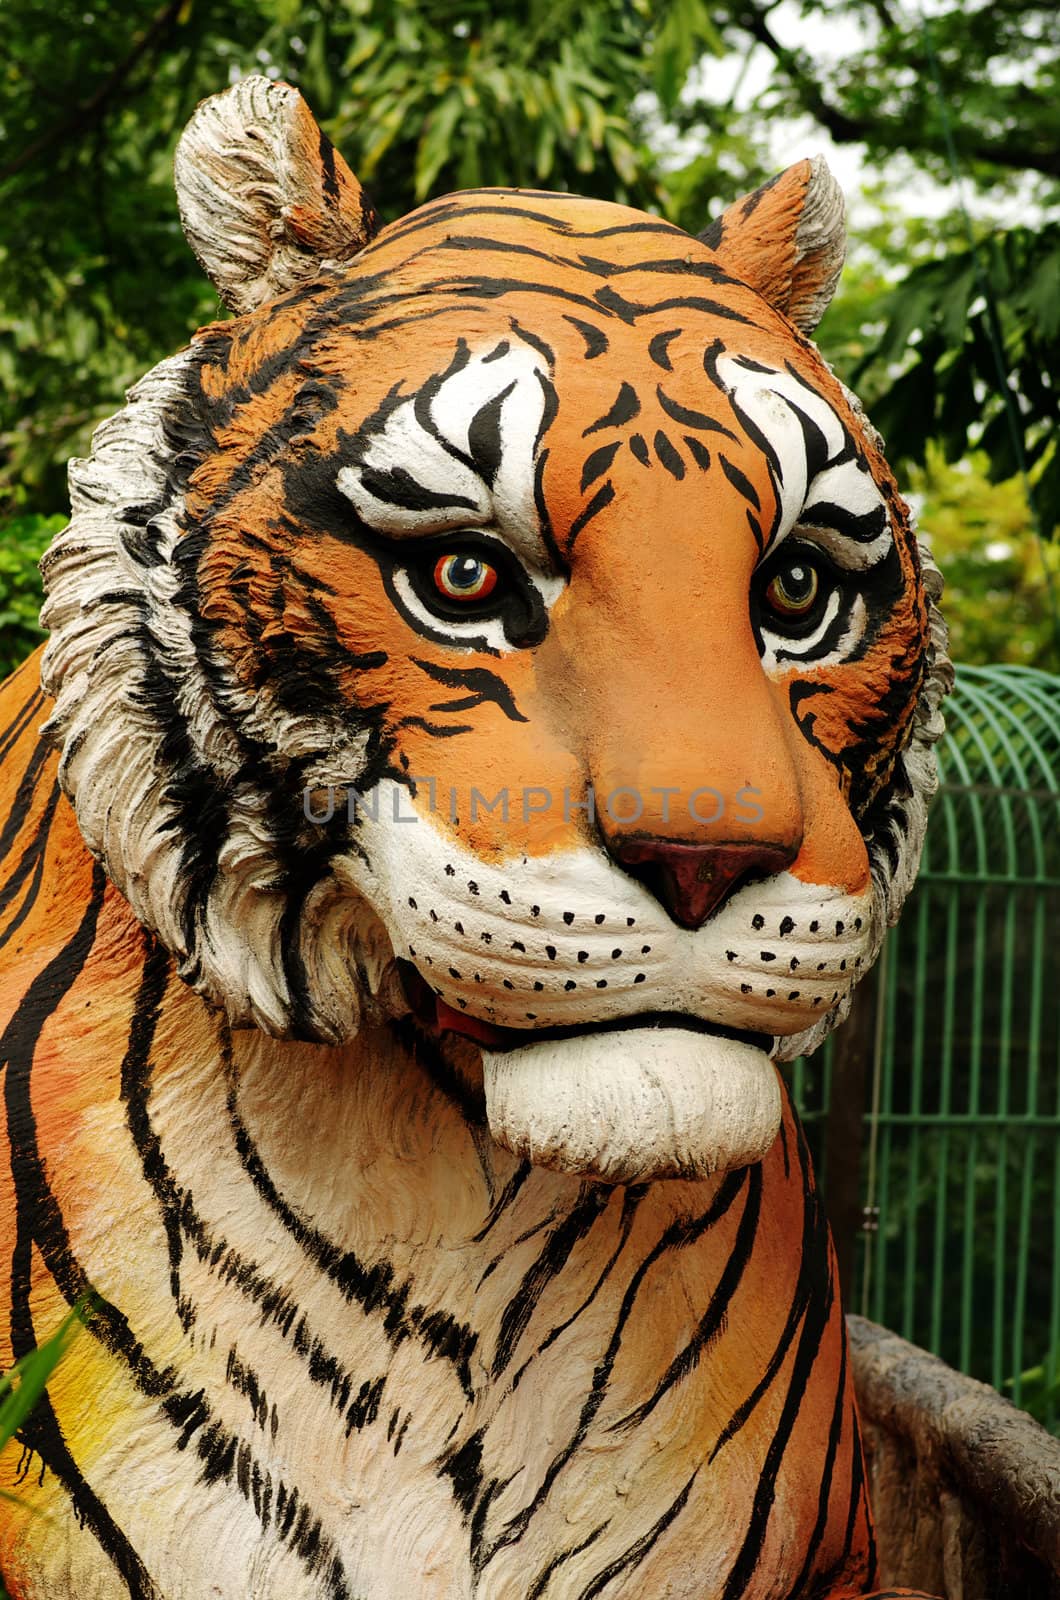 Tiger statue in thailand zoo